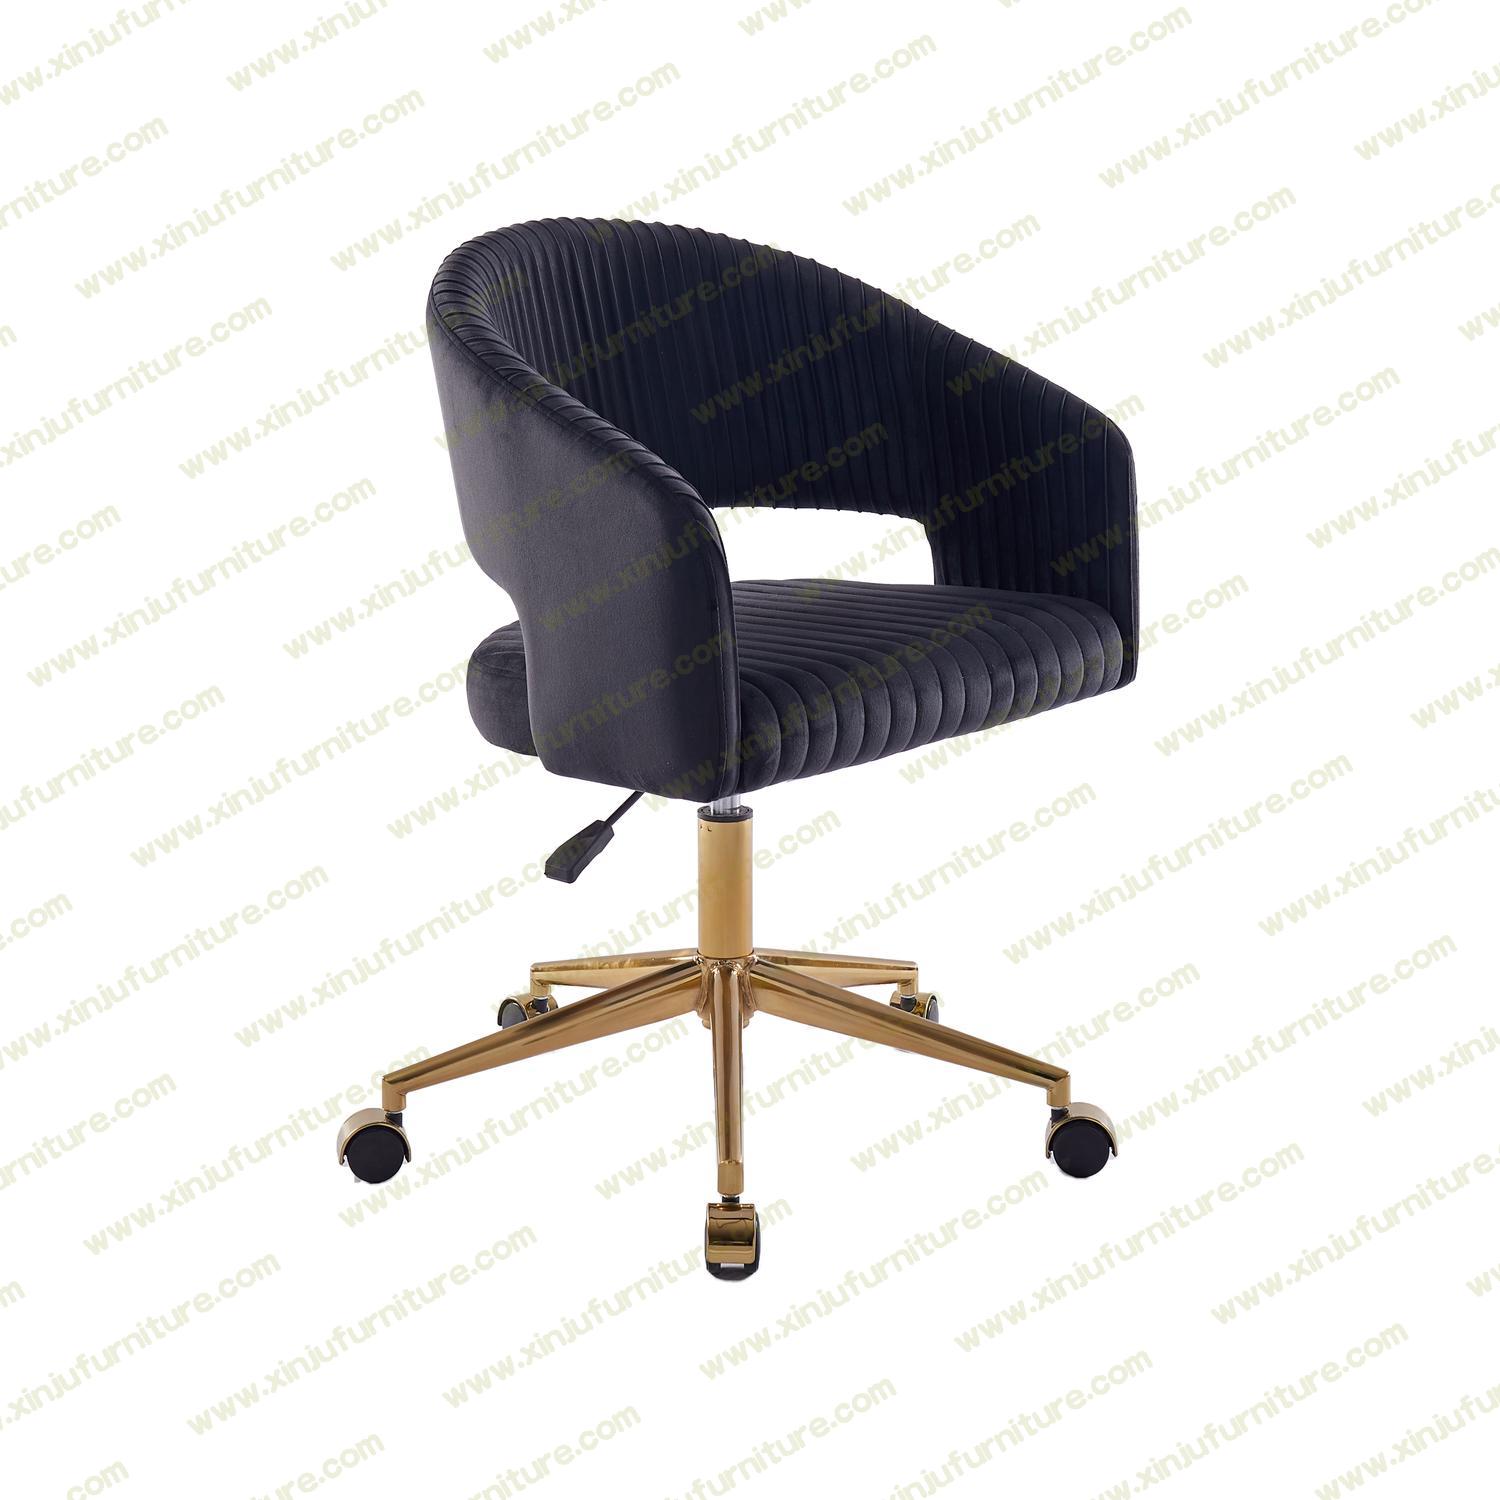 Simple removable tufted office chair Stripe Black